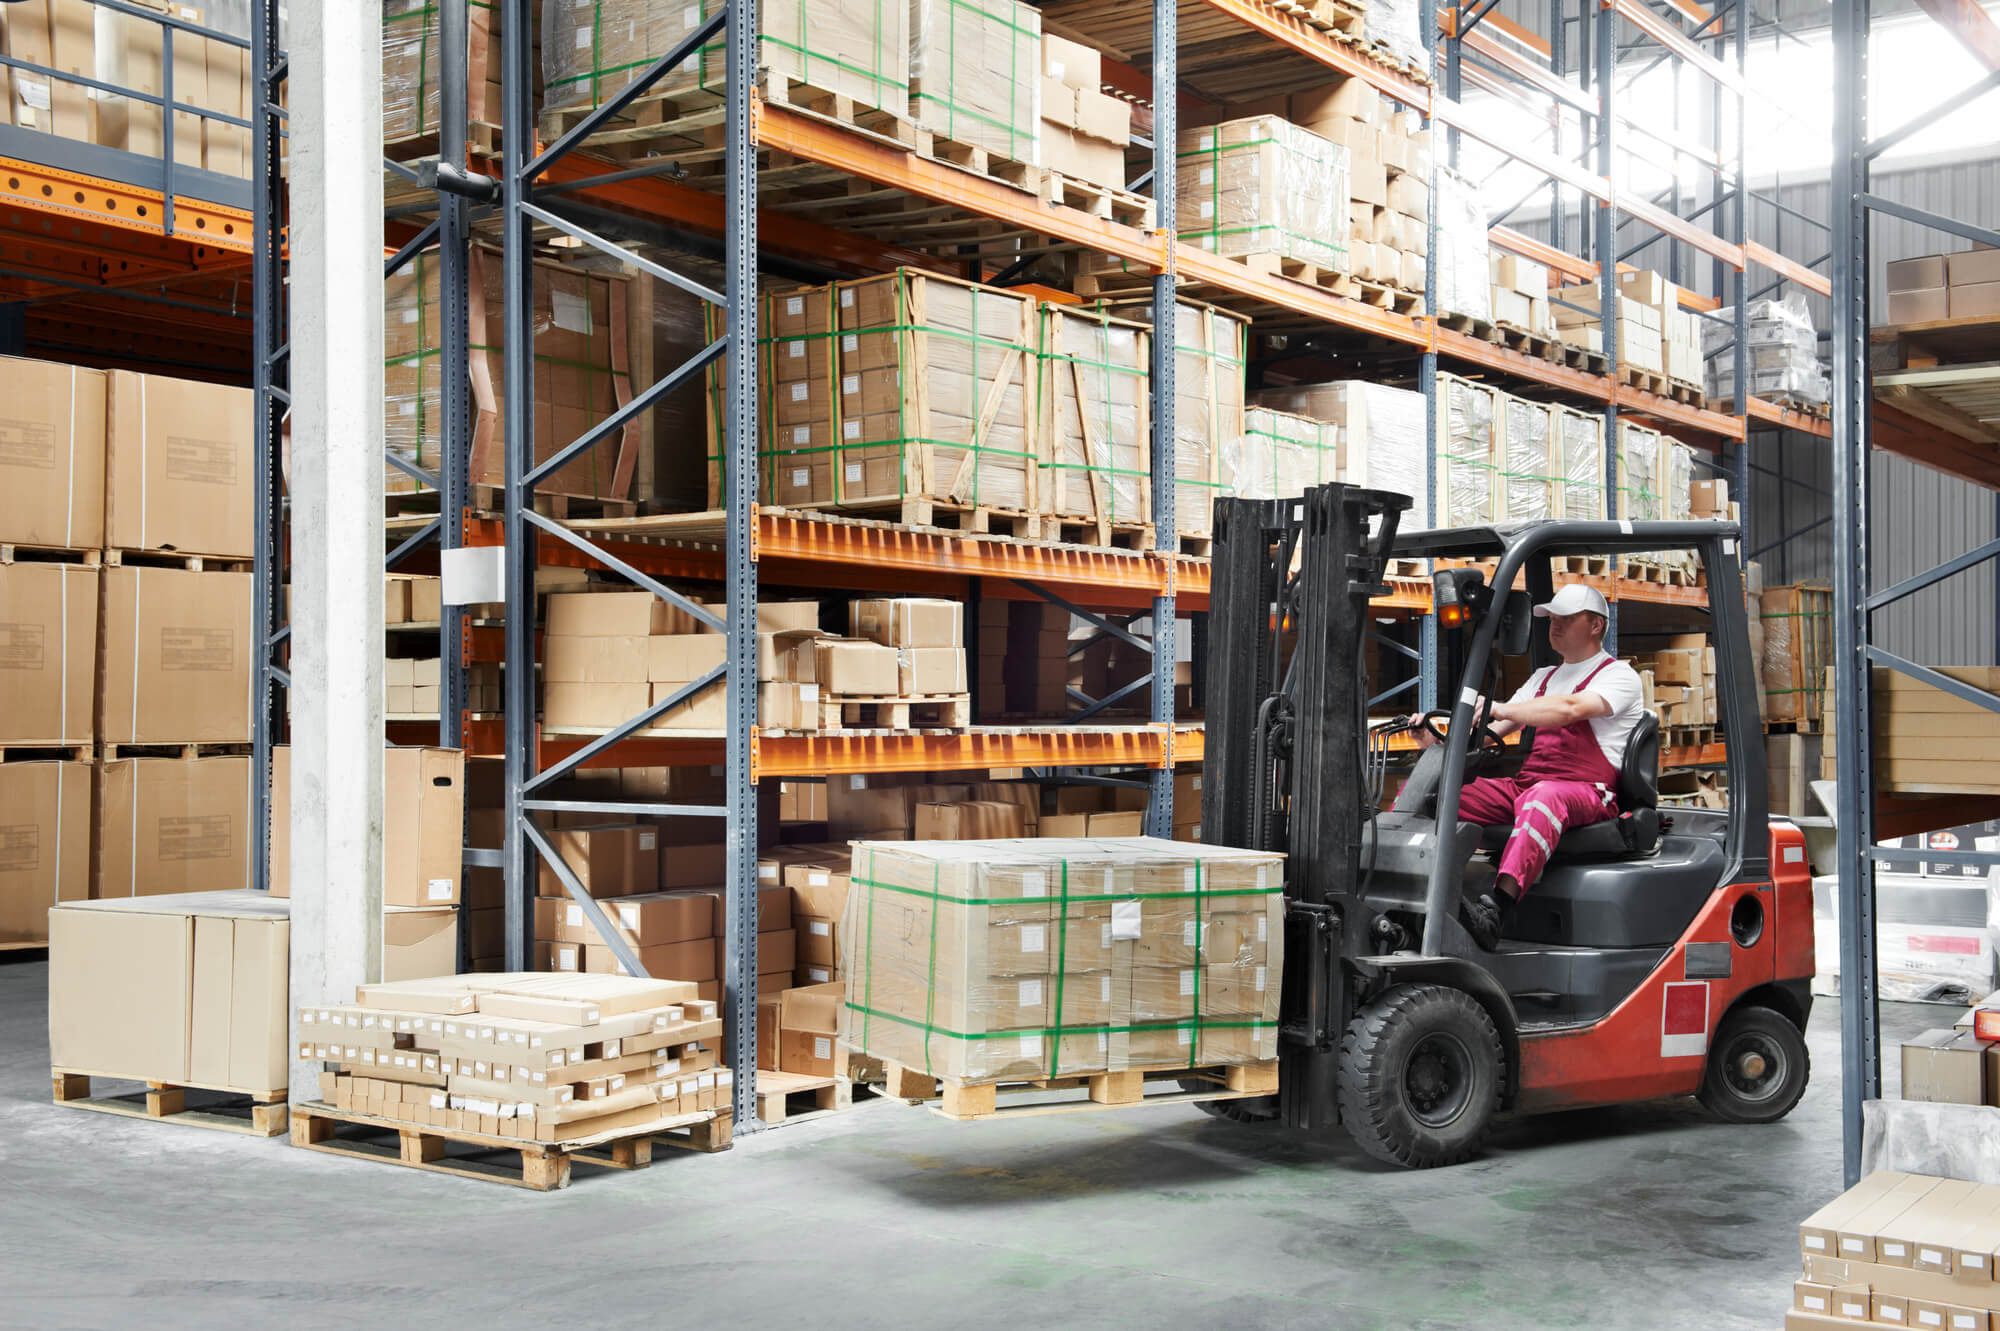 Seven Proven Ways To Get Rid Of Surplus Inventory Or Old Stock / Industrial Clearance